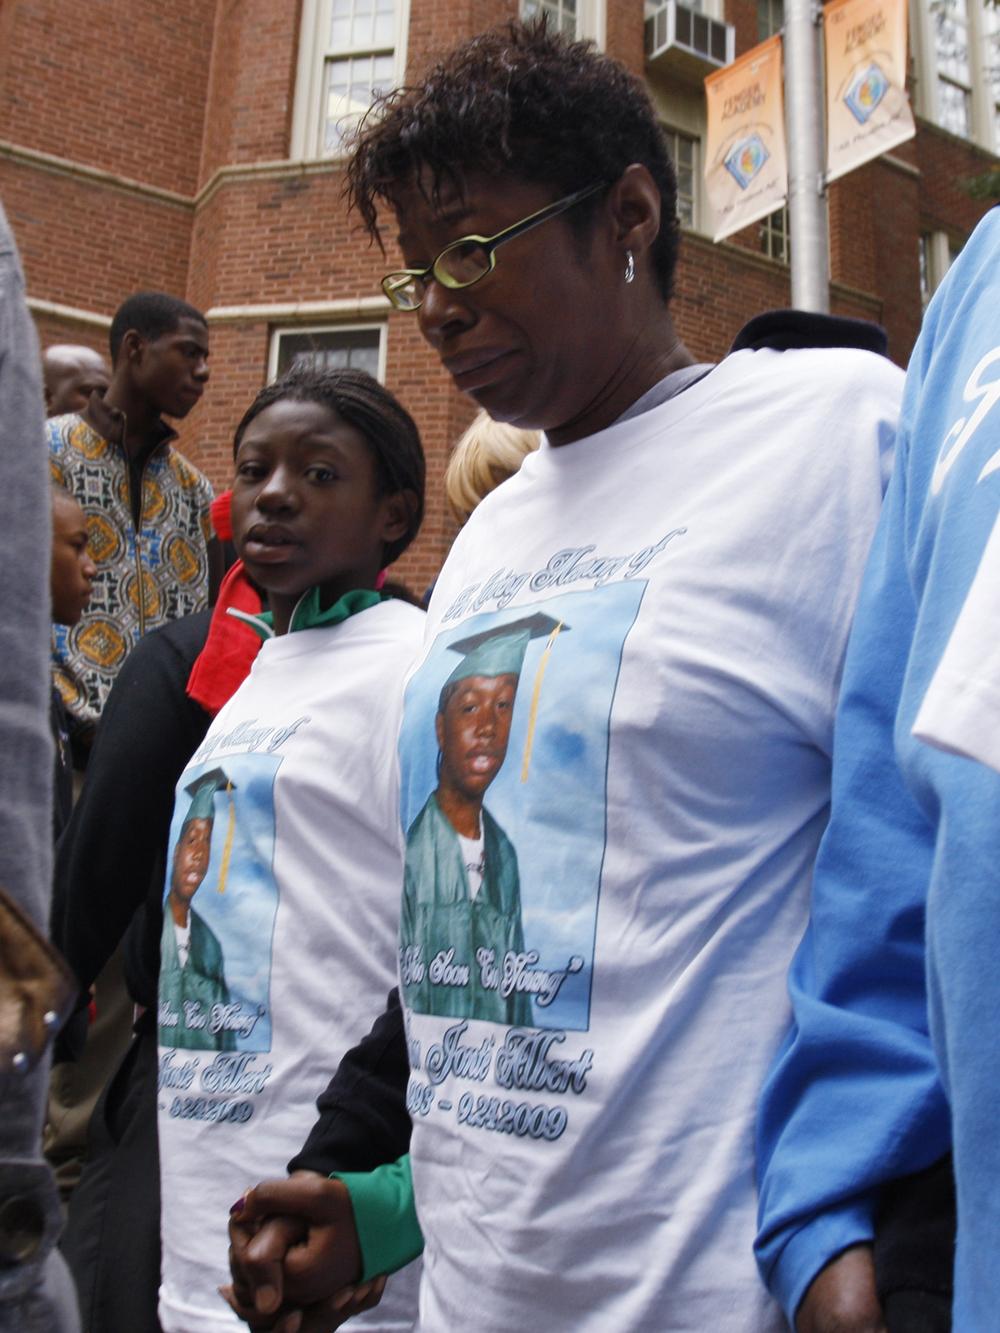 An-Janette L. Albert, center, mother of 16-year old Derrion Albert who was beaten to death earlier in the week, cries as she walks to Fenger High School  in Chicago, Sept. 28, 2009. A vigil for Derrion Albert was planned outside of  Fenger High School.(AP)